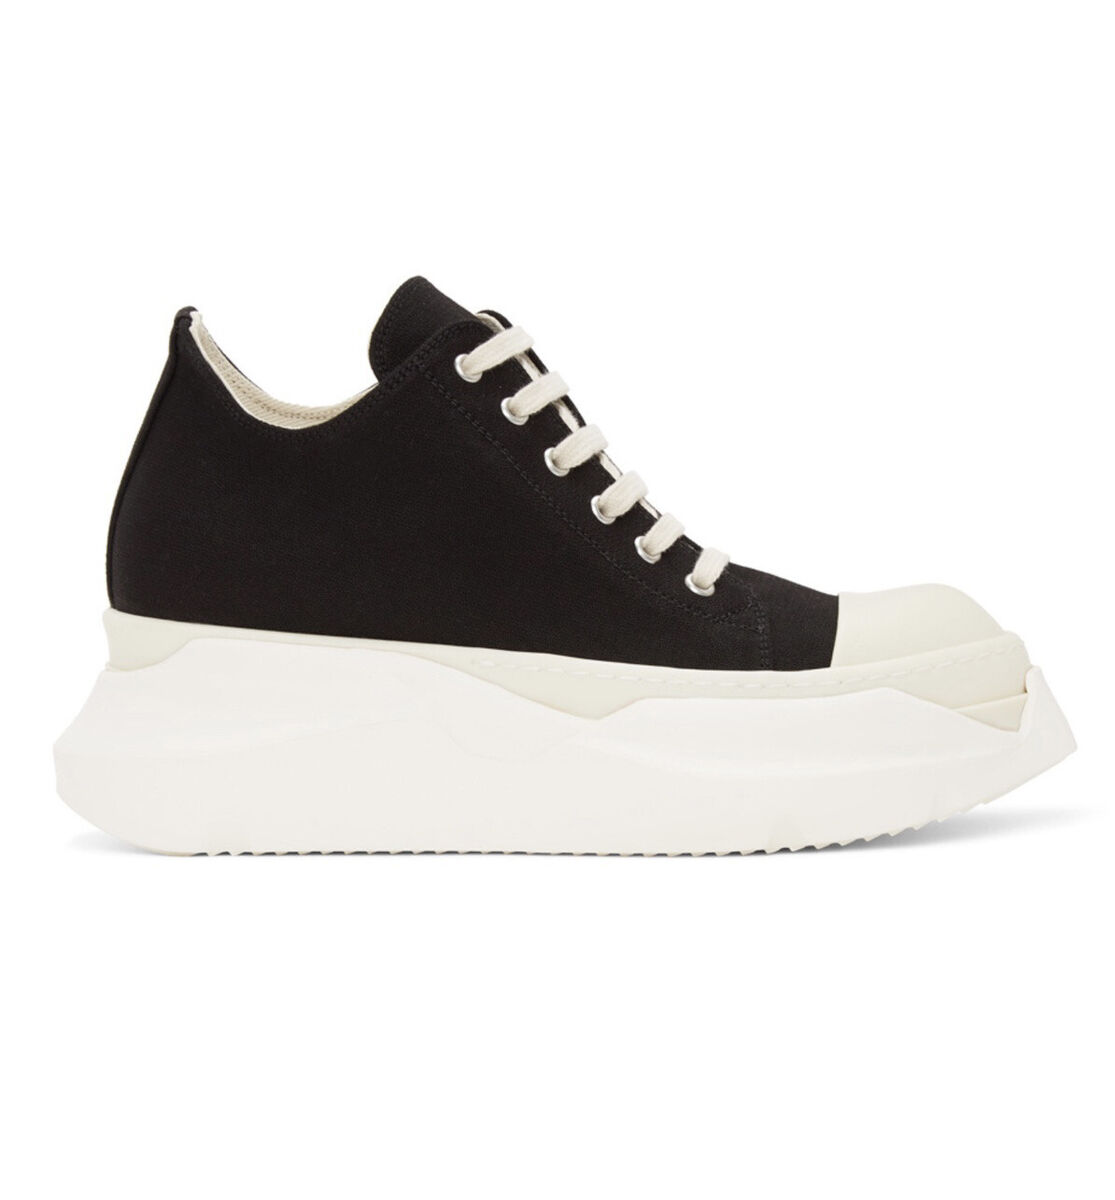 Rick Owens Drkshdw S/S 2021 Abstract Low Sneaker Slightly Used Size 12 /45